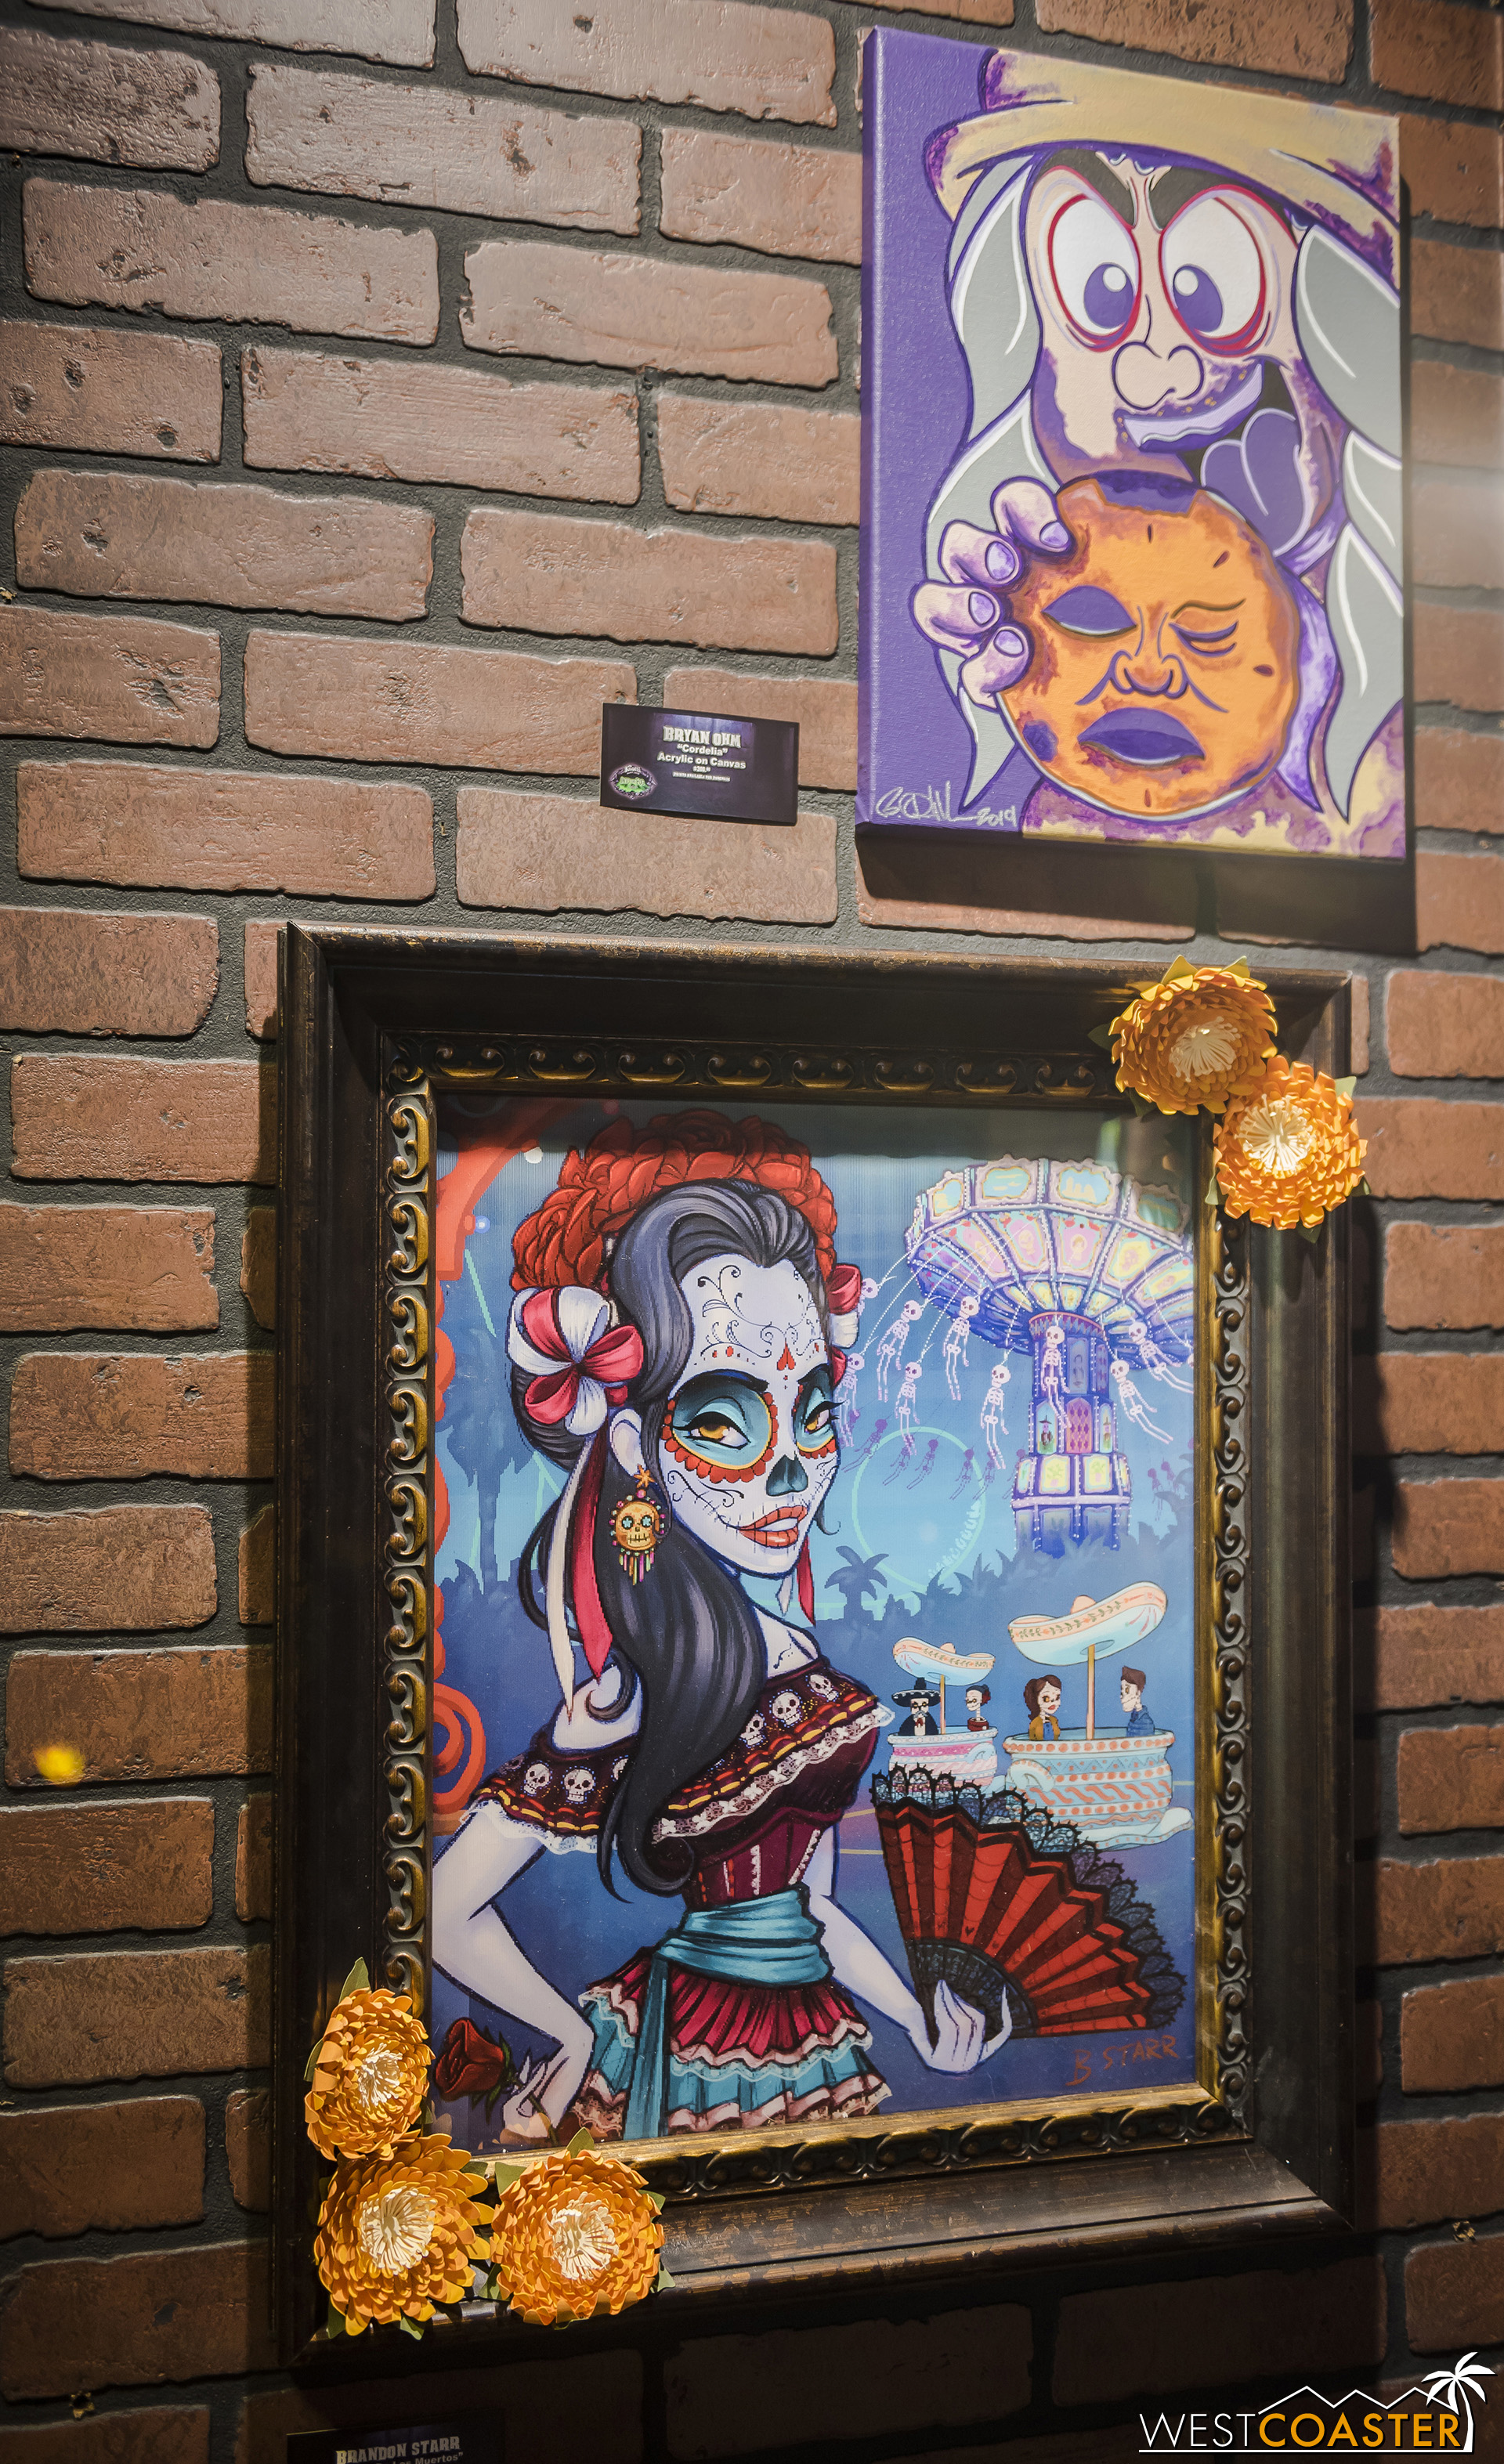  And this was cool.  Someone did a holographic piece themed to Fiesta de los Muertos! 